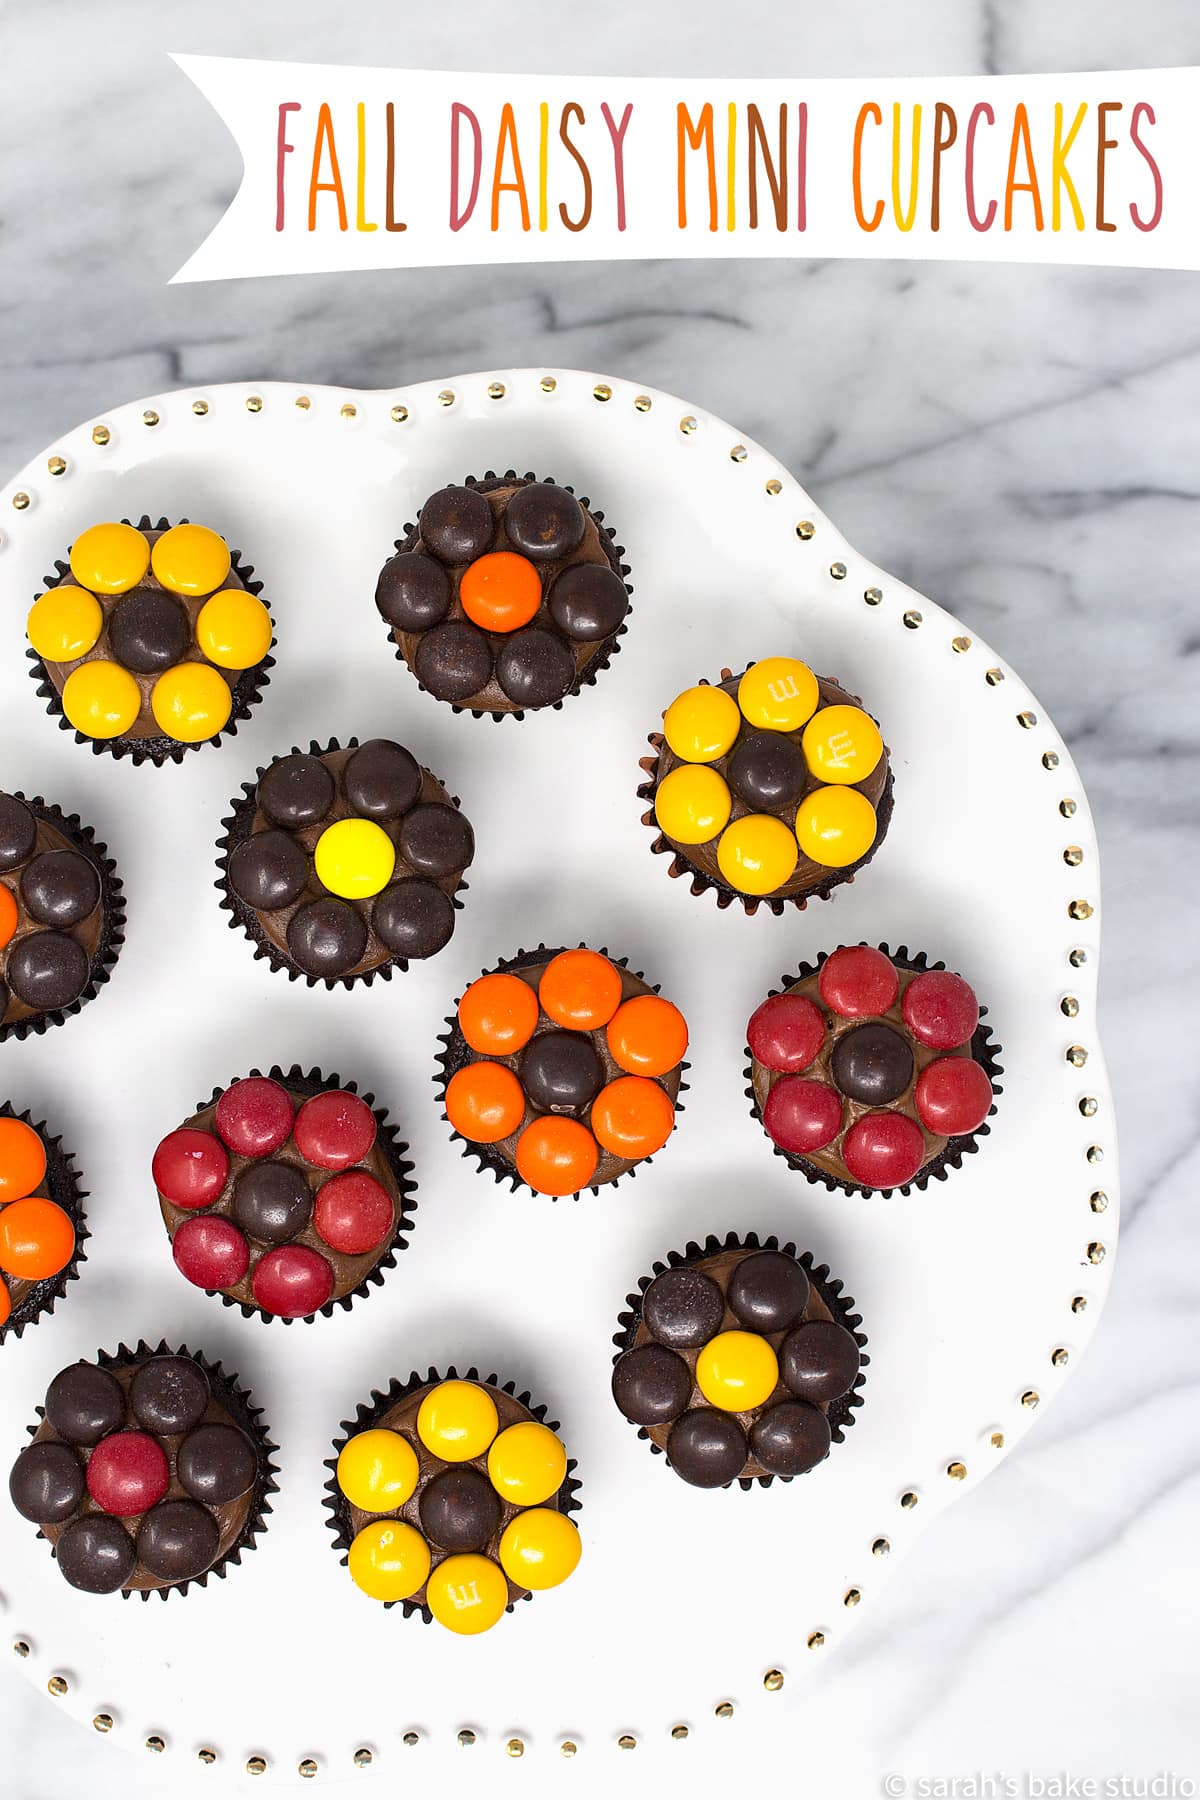 A cake plate with fall daisy mini cupcakes on display.